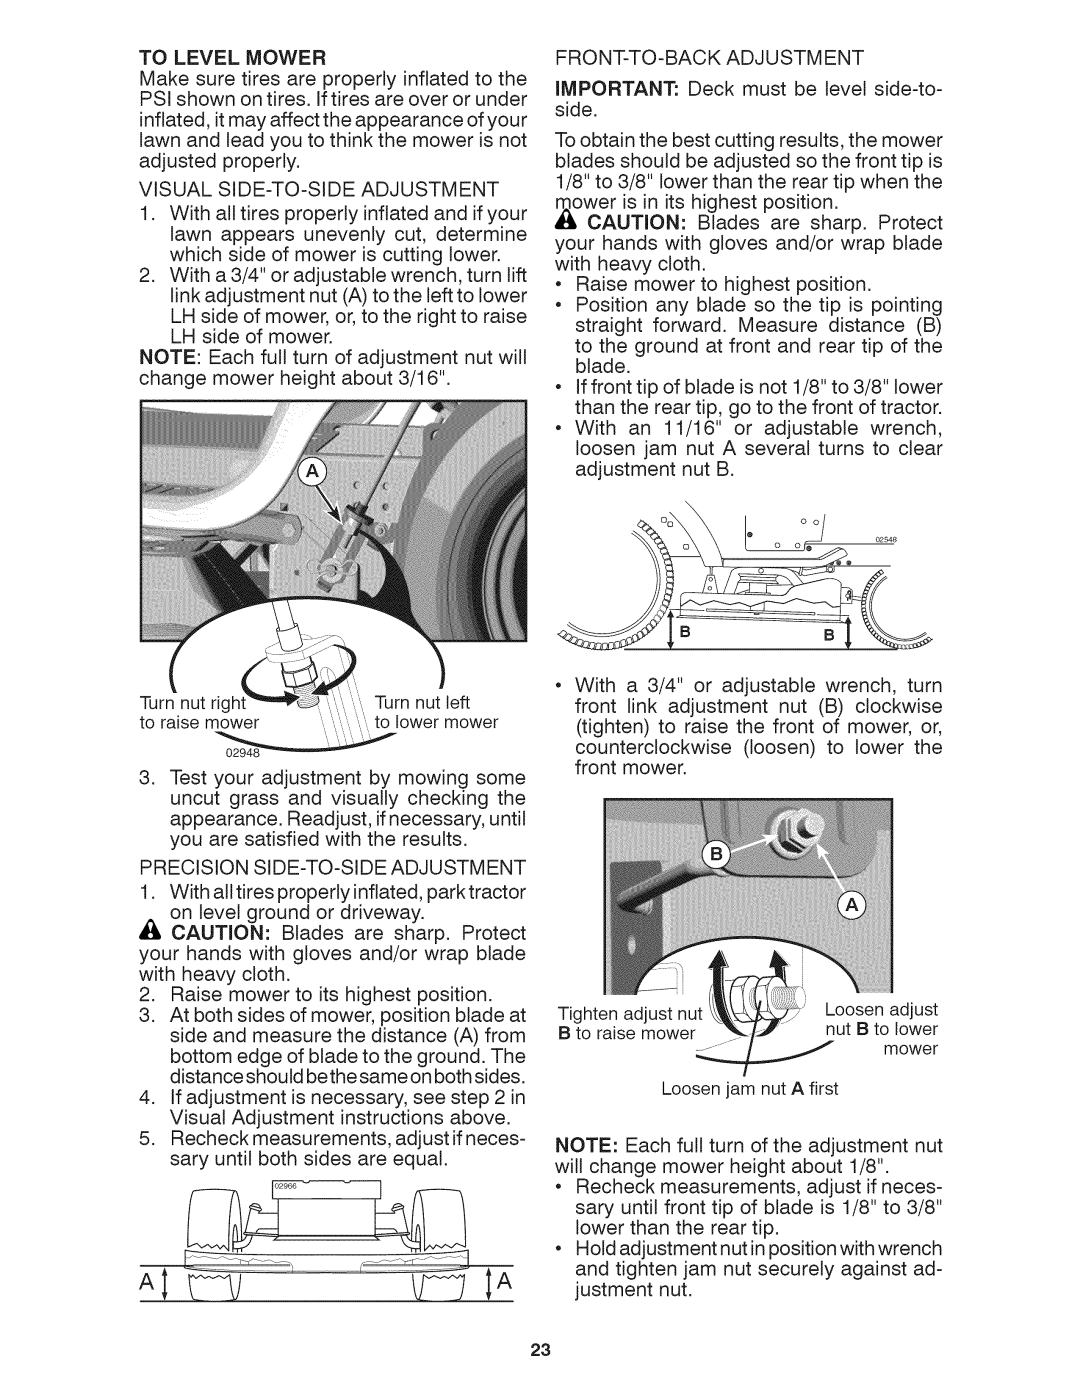 Craftsman 917.28035 owner manual To Level Mower, IMPORTANT: Deck must be level side-to-side, _ __/J 